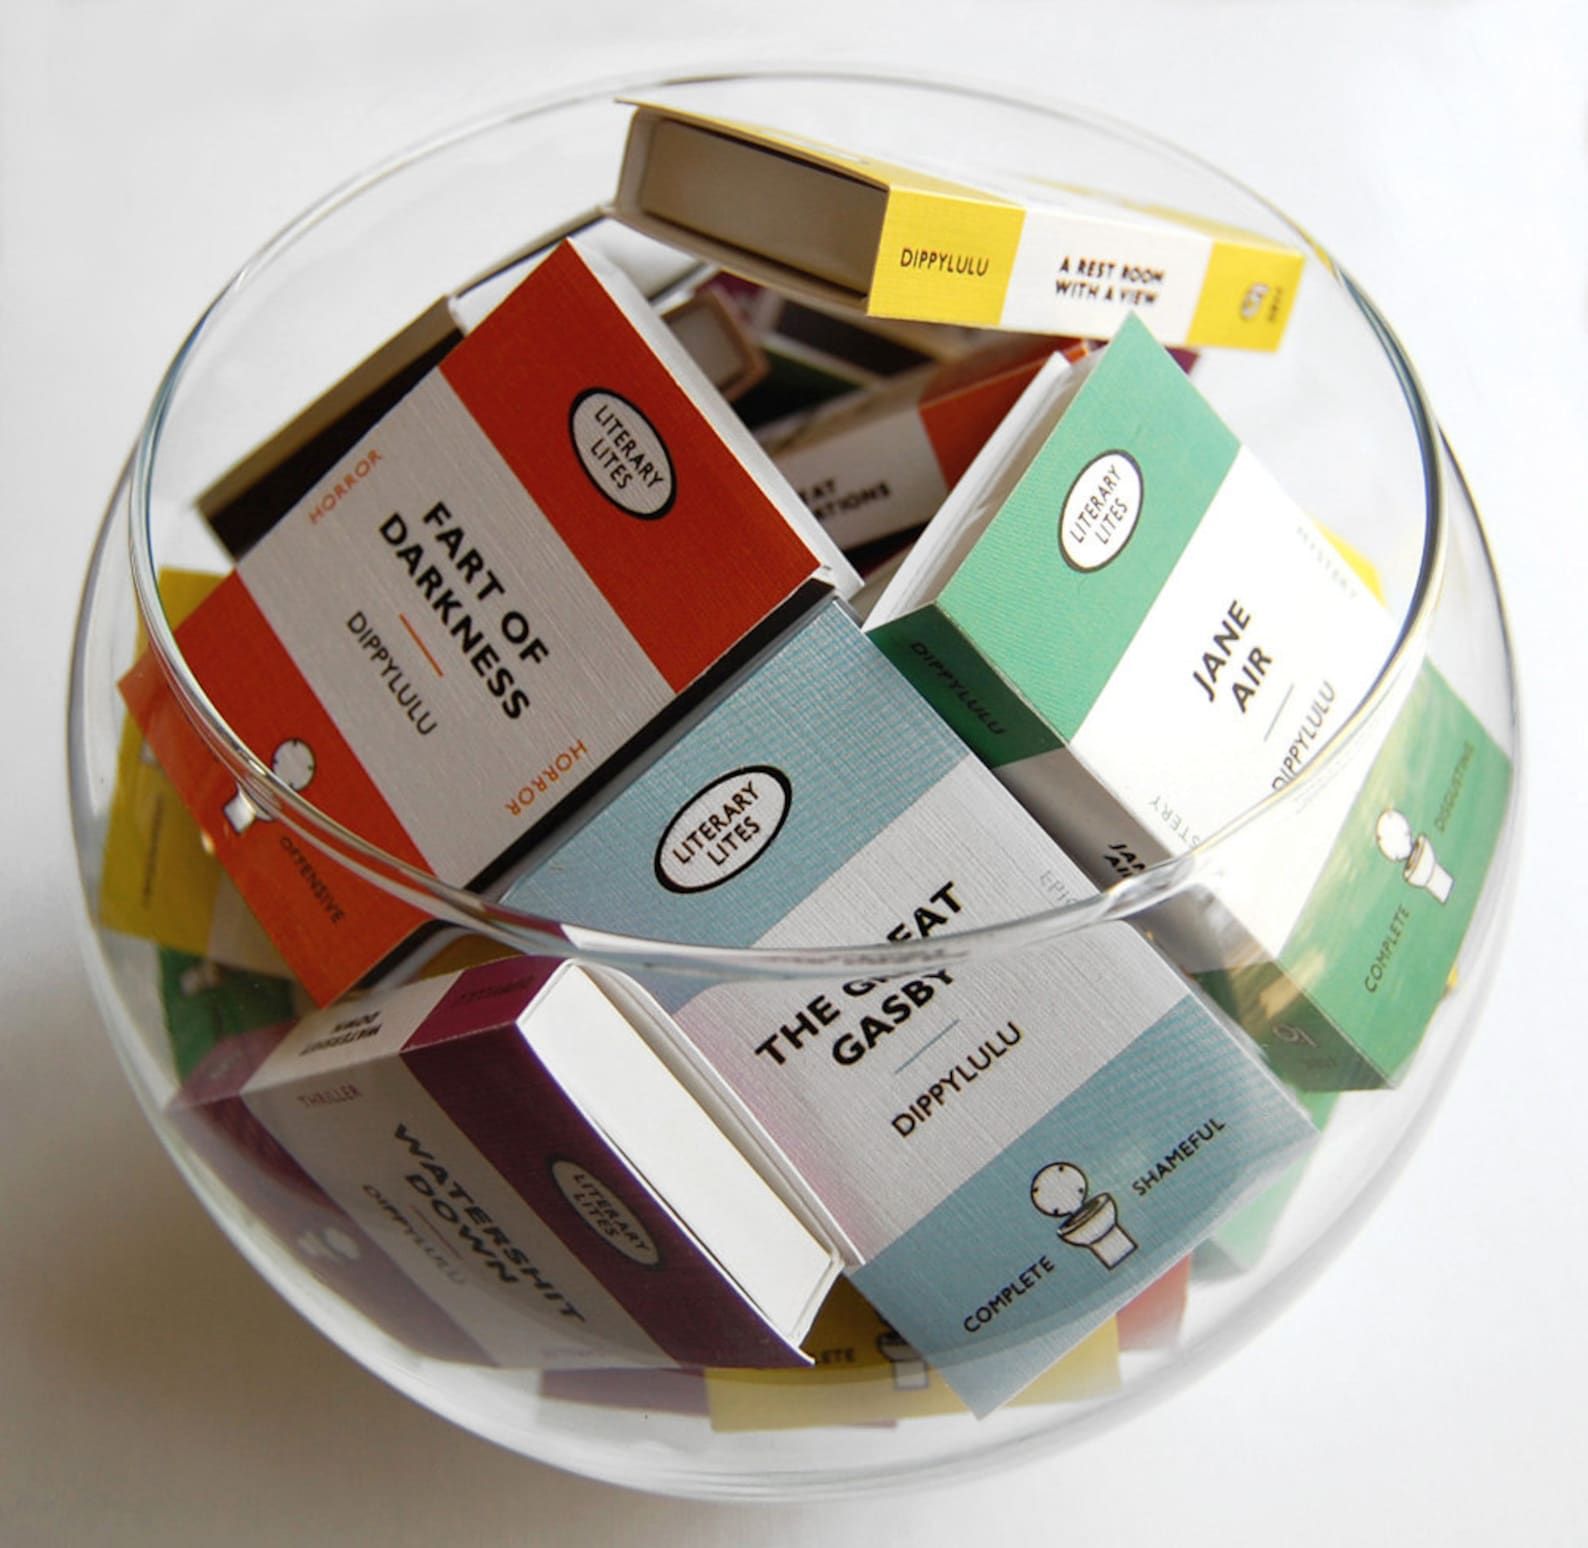 A glass bowl full of matchboxes in the design of Penguin Classics with gag titles